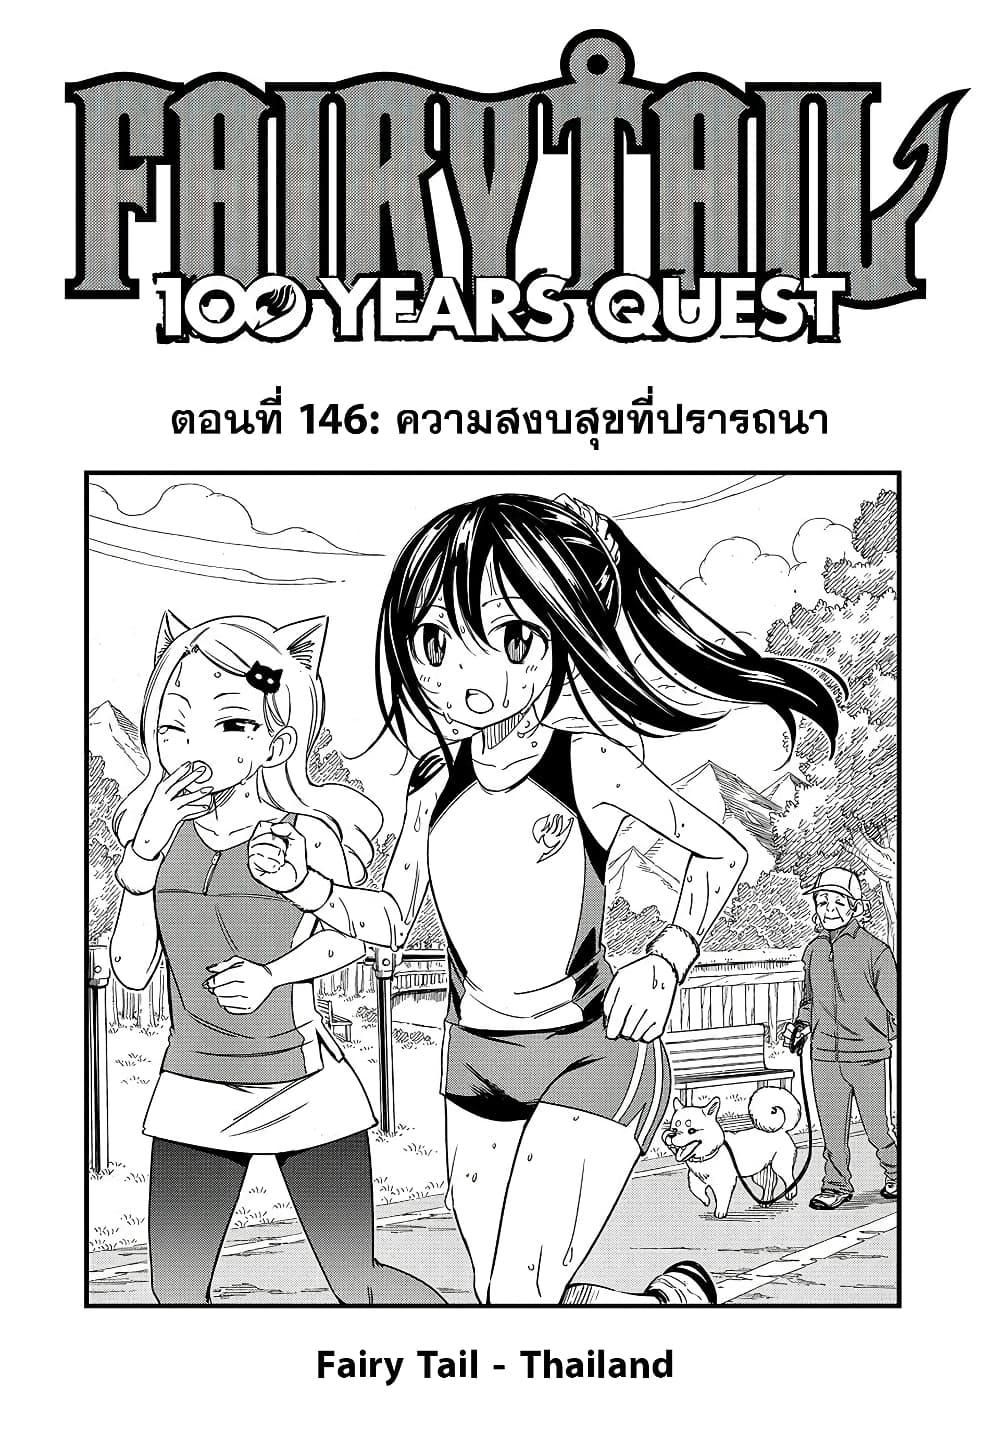 Fairy Tail 100 Years Quest ตอนที่ 146 (1)